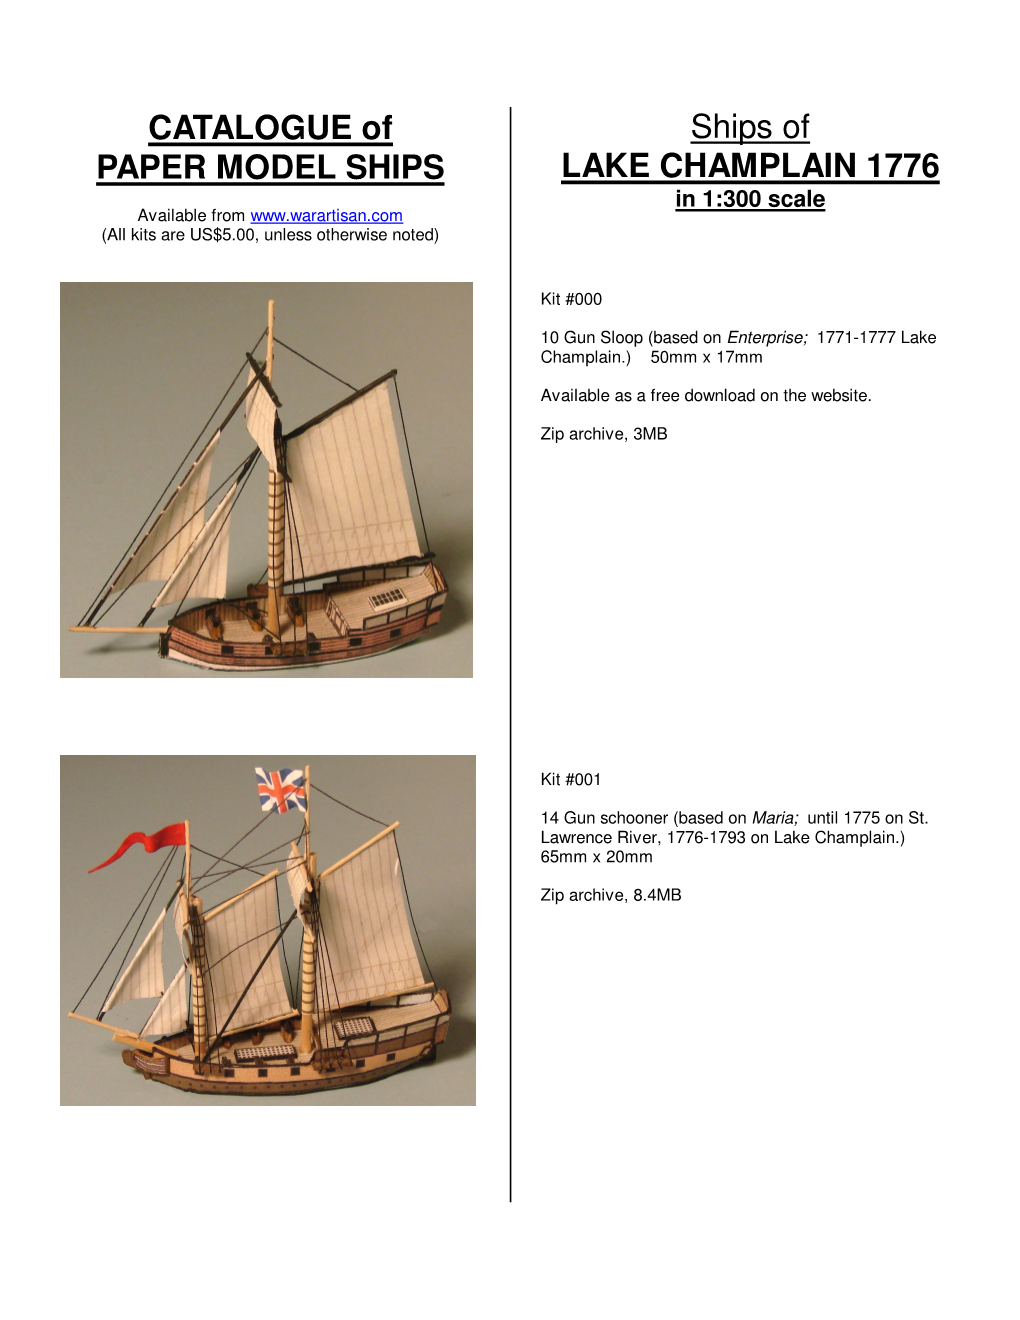 CATALOGUE of PAPER MODEL SHIPS